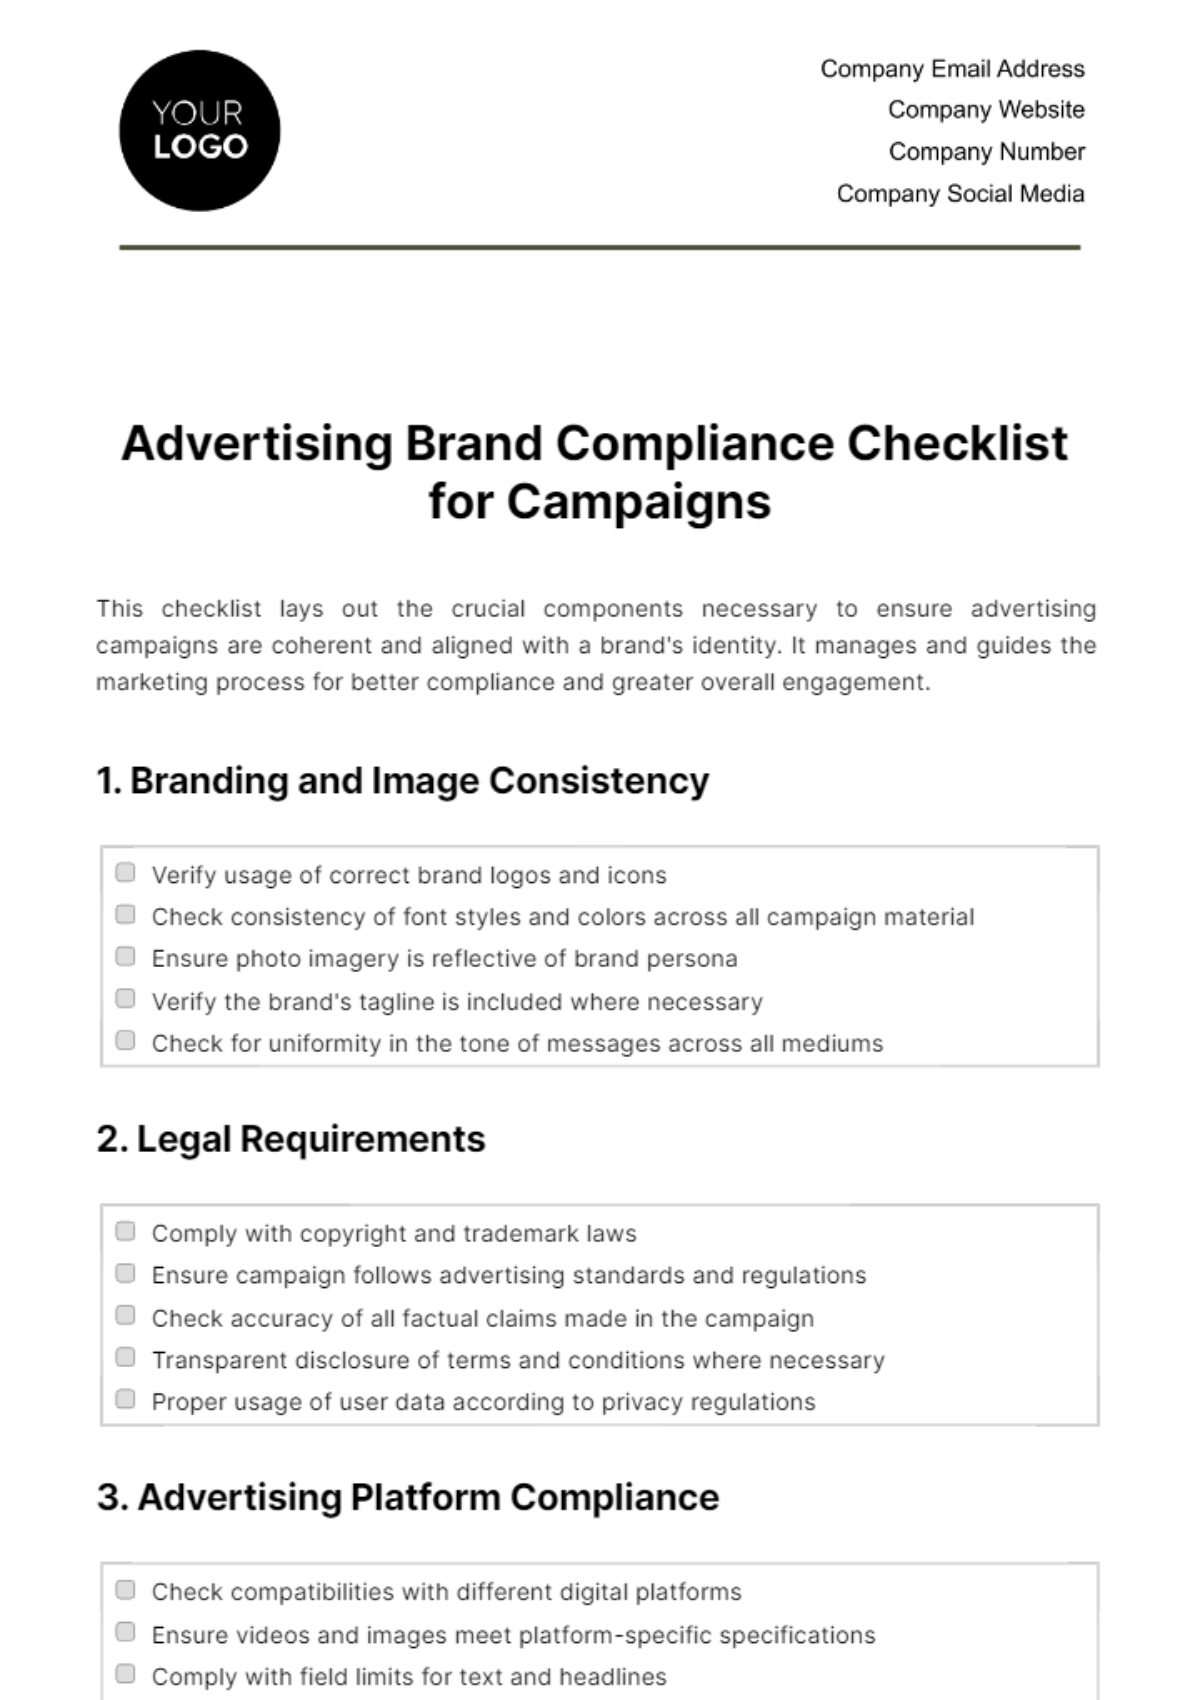 Free Advertising Brand Compliance Checklist for Campaigns Template